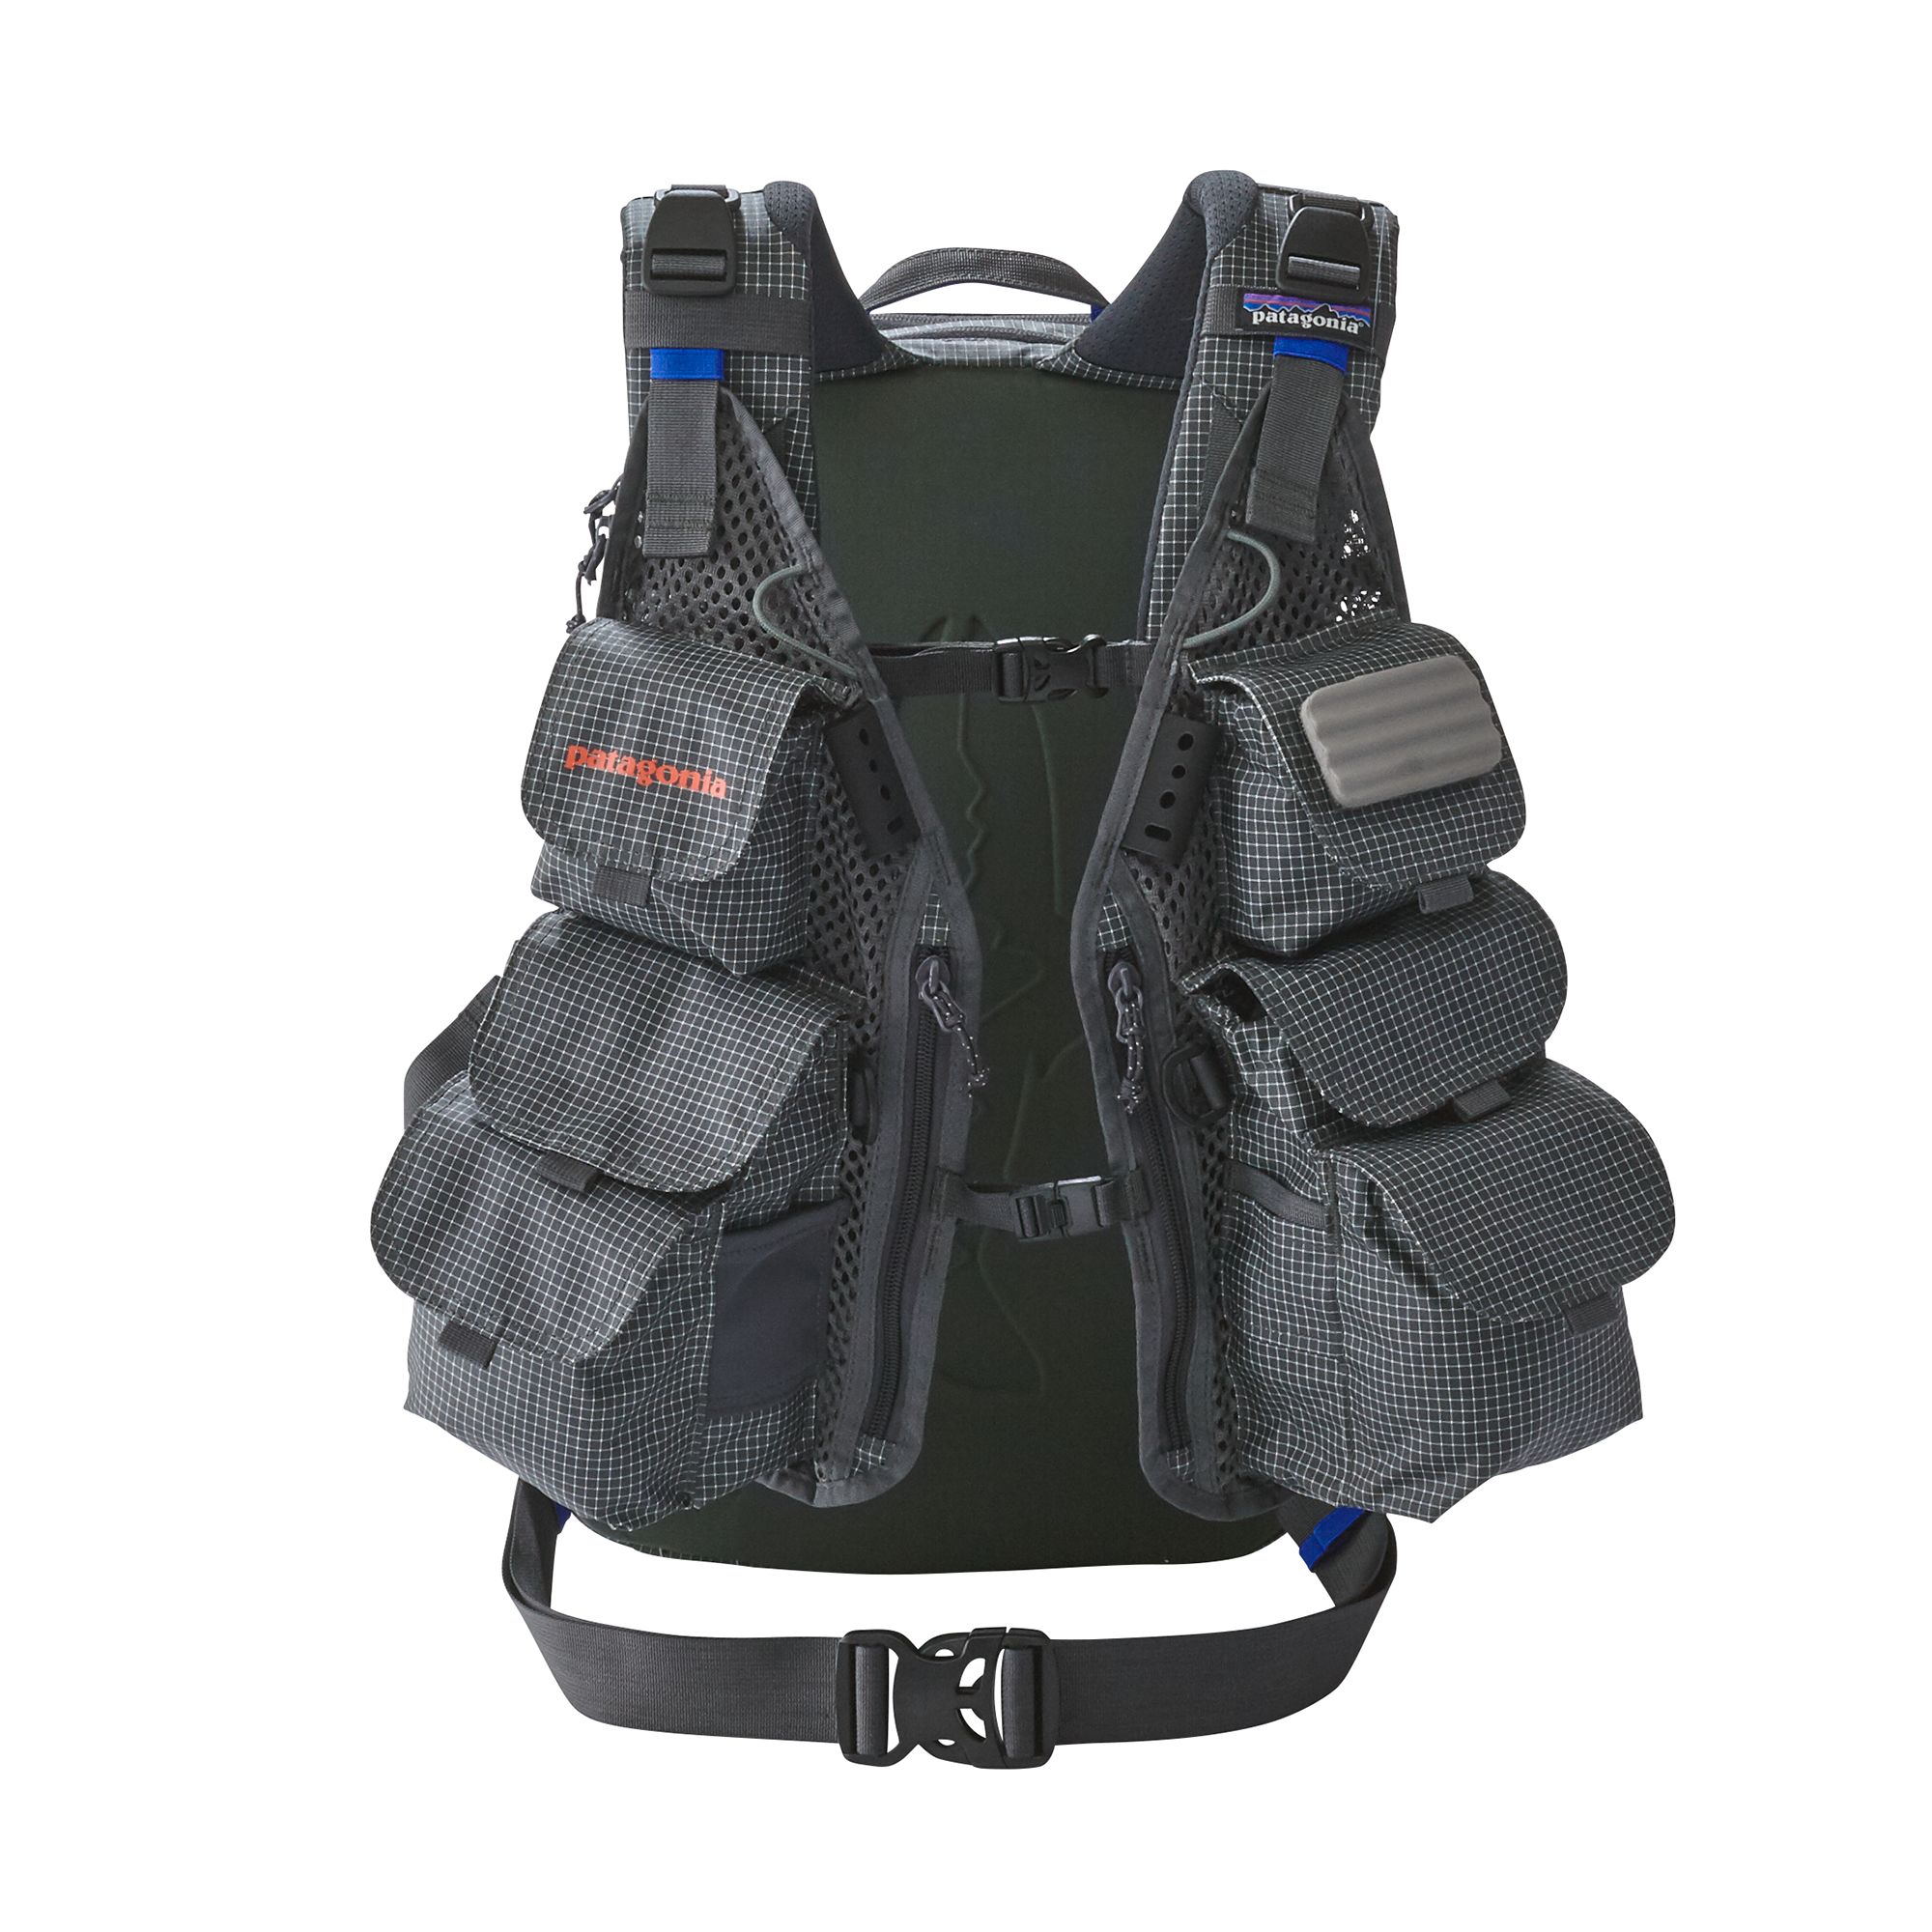 Patagonia Fly Fishing Backpack Vest Combo For Sale In, 47% OFF